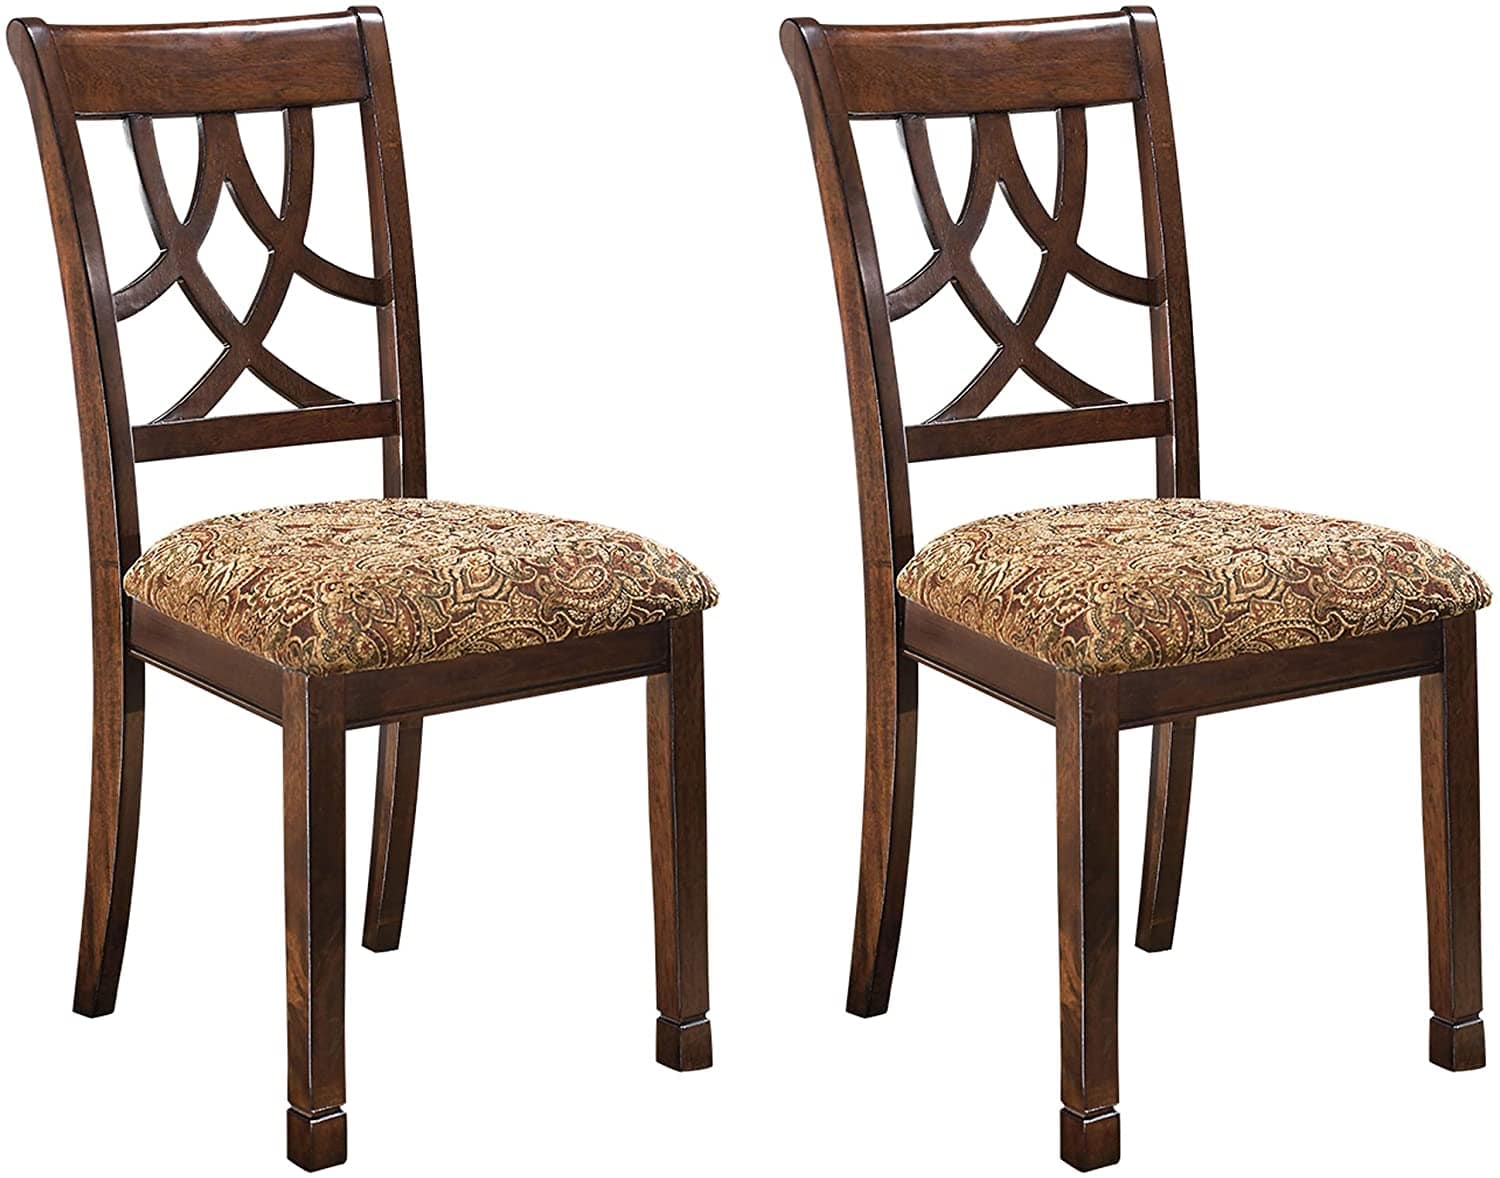 Leahlyn Dining Upholstered Side Chair - Pierced Splat Back - Set of 2 -Brown